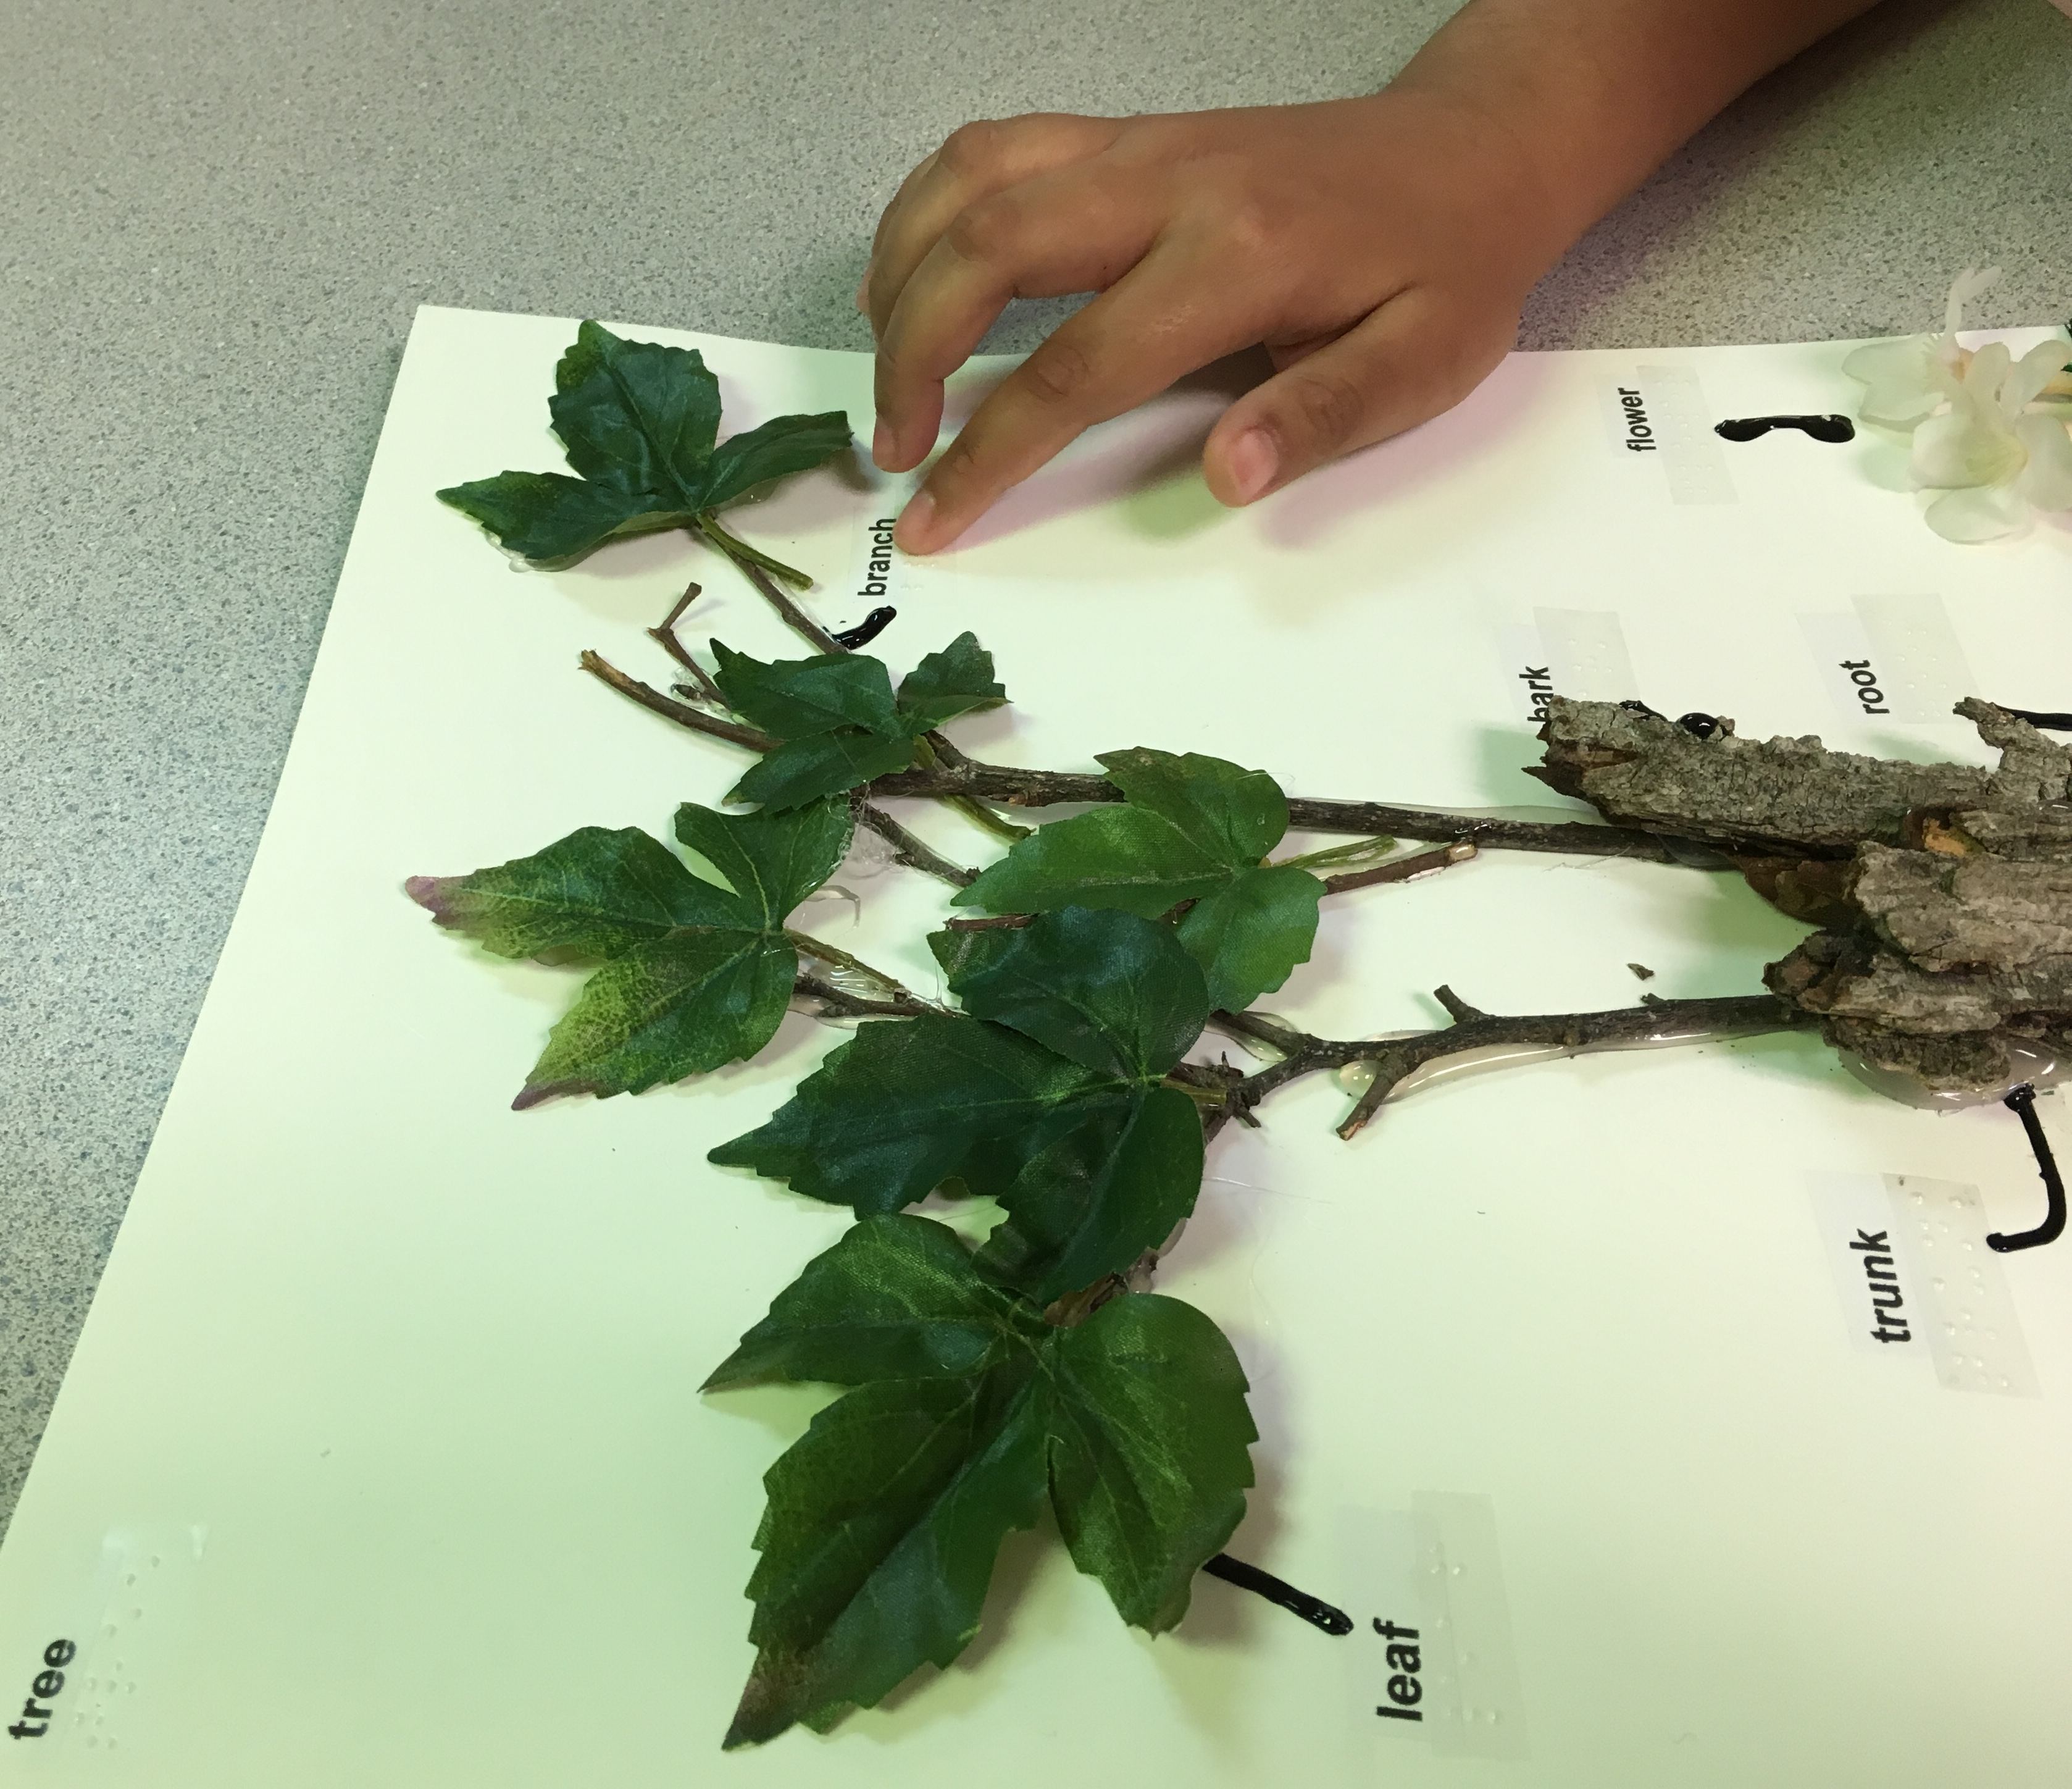 A student reads the braille on the tactile illustration of a tree.